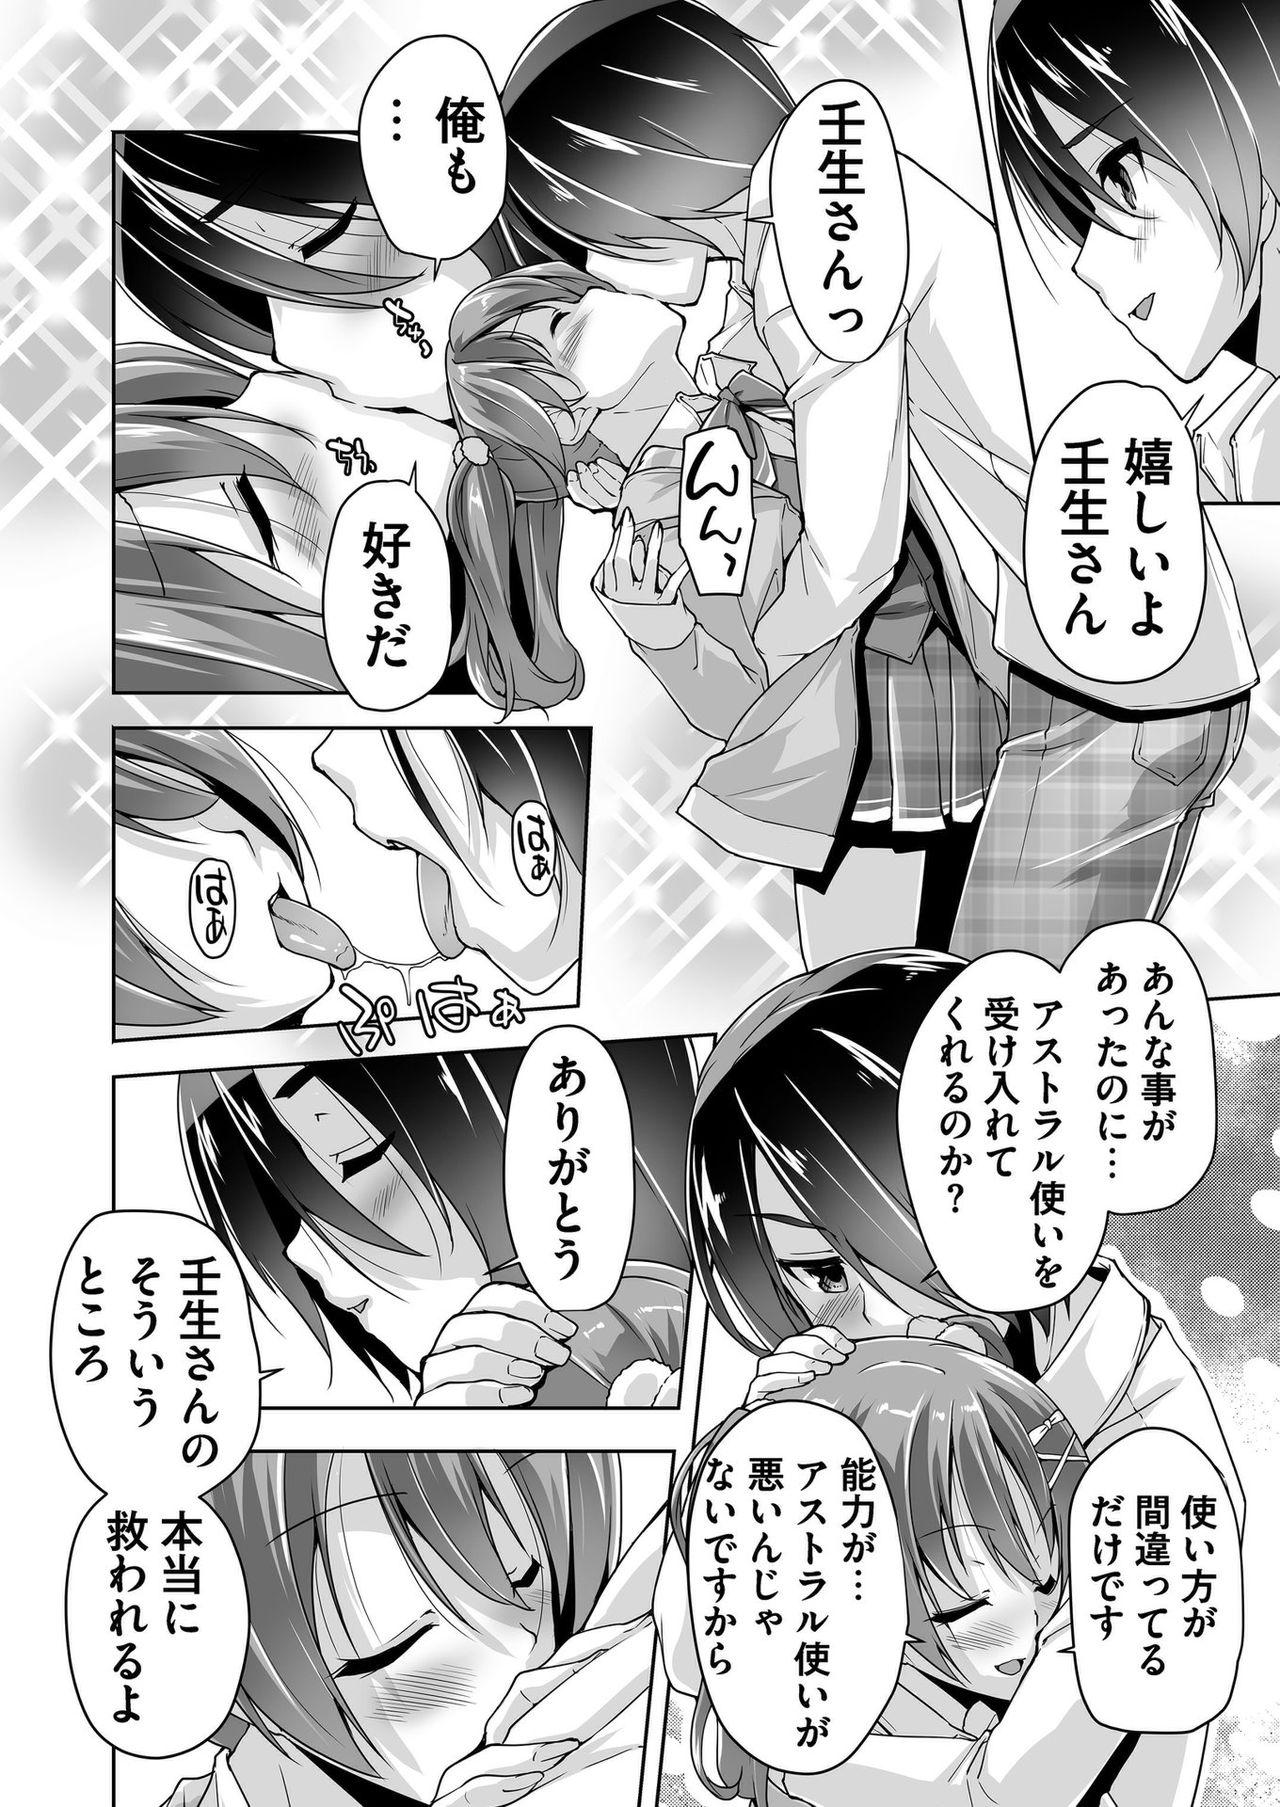 Rimjob Chisaki to chikan play de hatsu H! ? - Riddle joker Belly - Page 10